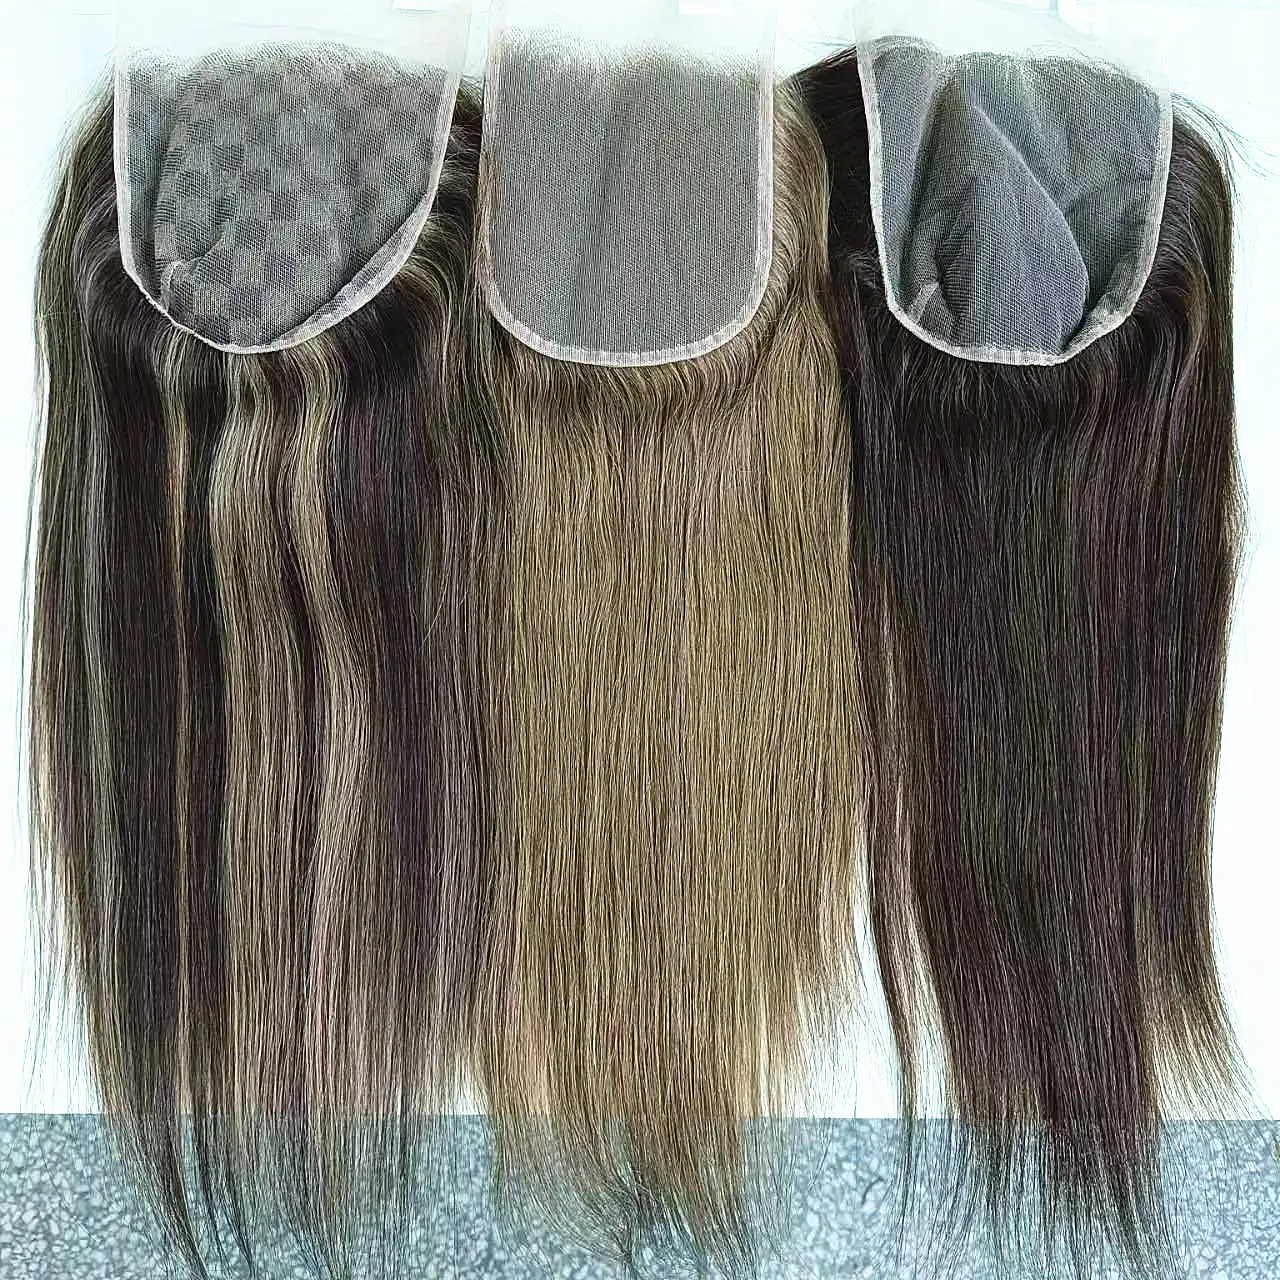 highest quality non-processed human hair lace base closures colors lace front closure for hair loss replacement systems